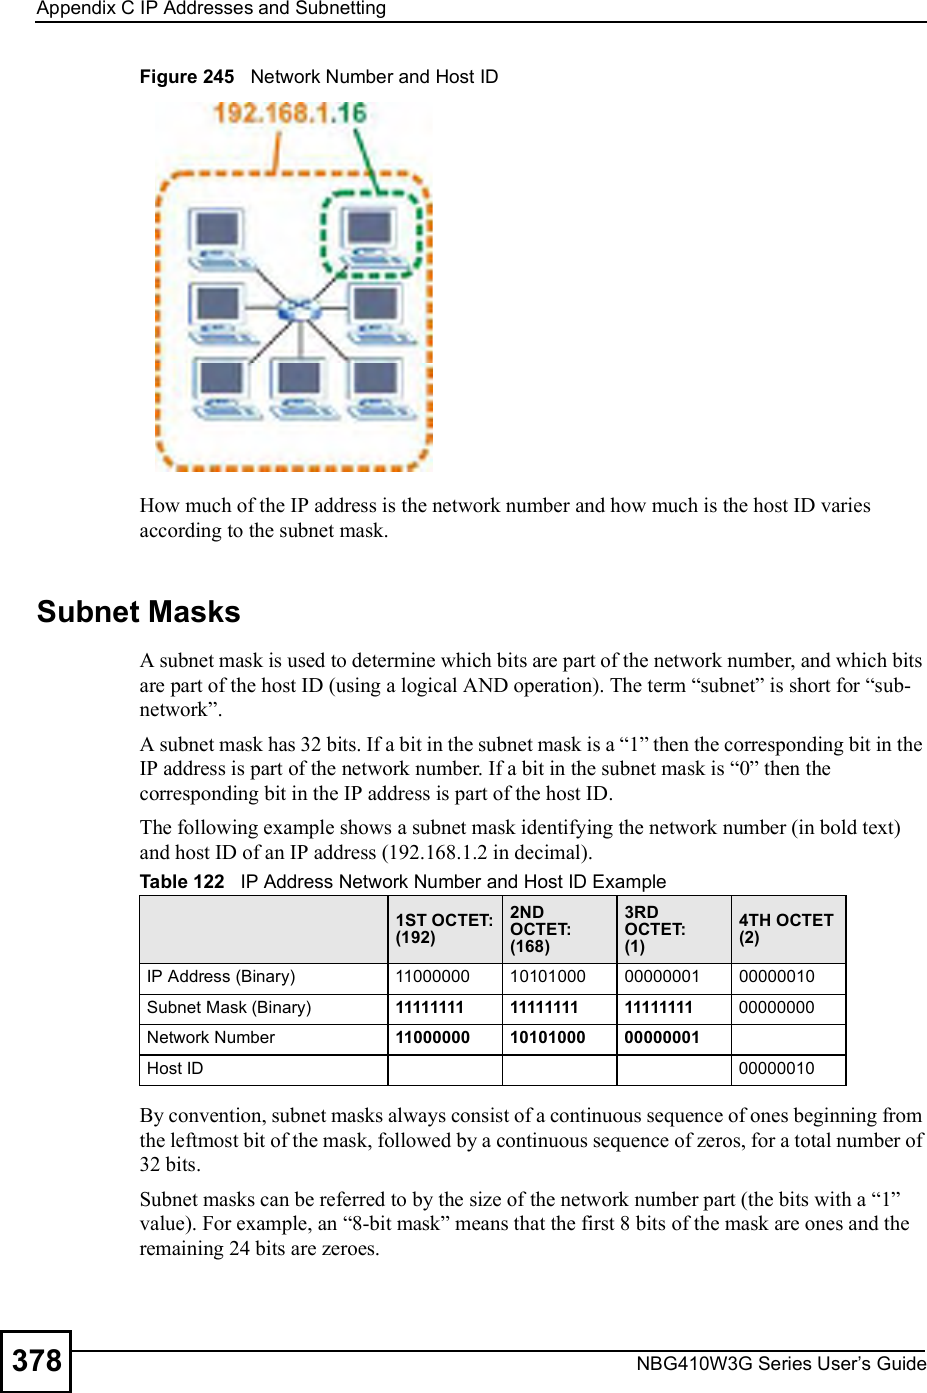 Appendix CIP Addresses and SubnettingNBG410W3G Series User s Guide378Figure 245   Network Number and Host IDHow much of the IP address is the network number and how much is the host ID varies according to the subnet mask.  Subnet MasksA subnet mask is used to determine which bits are part of the network number, and which bits are part of the host ID (using a logical AND operation). The term &quot;subnet# is short for &quot;sub-network#.A subnet mask has 32 bits. If a bit in the subnet mask is a &quot;1# then the corresponding bit in the IP address is part of the network number. If a bit in the subnet mask is &quot;0# then the corresponding bit in the IP address is part of the host ID. The following example shows a subnet mask identifying the network number (in bold text) and host ID of an IP address (192.168.1.2 in decimal).By convention, subnet masks always consist of a continuous sequence of ones beginning from the leftmost bit of the mask, followed by a continuous sequence of zeros, for a total number of 32 bits.Subnet masks can be referred to by the size of the network number part (the bits with a &quot;1# value). For example, an &quot;8-bit mask# means that the first 8 bits of the mask are ones and the remaining 24 bits are zeroes.Table 122   IP Address Network Number and Host ID Example1ST OCTET:(192)2ND OCTET:(168)3RD OCTET:(1)4TH OCTET(2)IP Address (Binary)11000000101010000000000100000010Subnet Mask (Binary) 111111111111111111111111 00000000Network Number 110000001010100000000001Host ID00000010